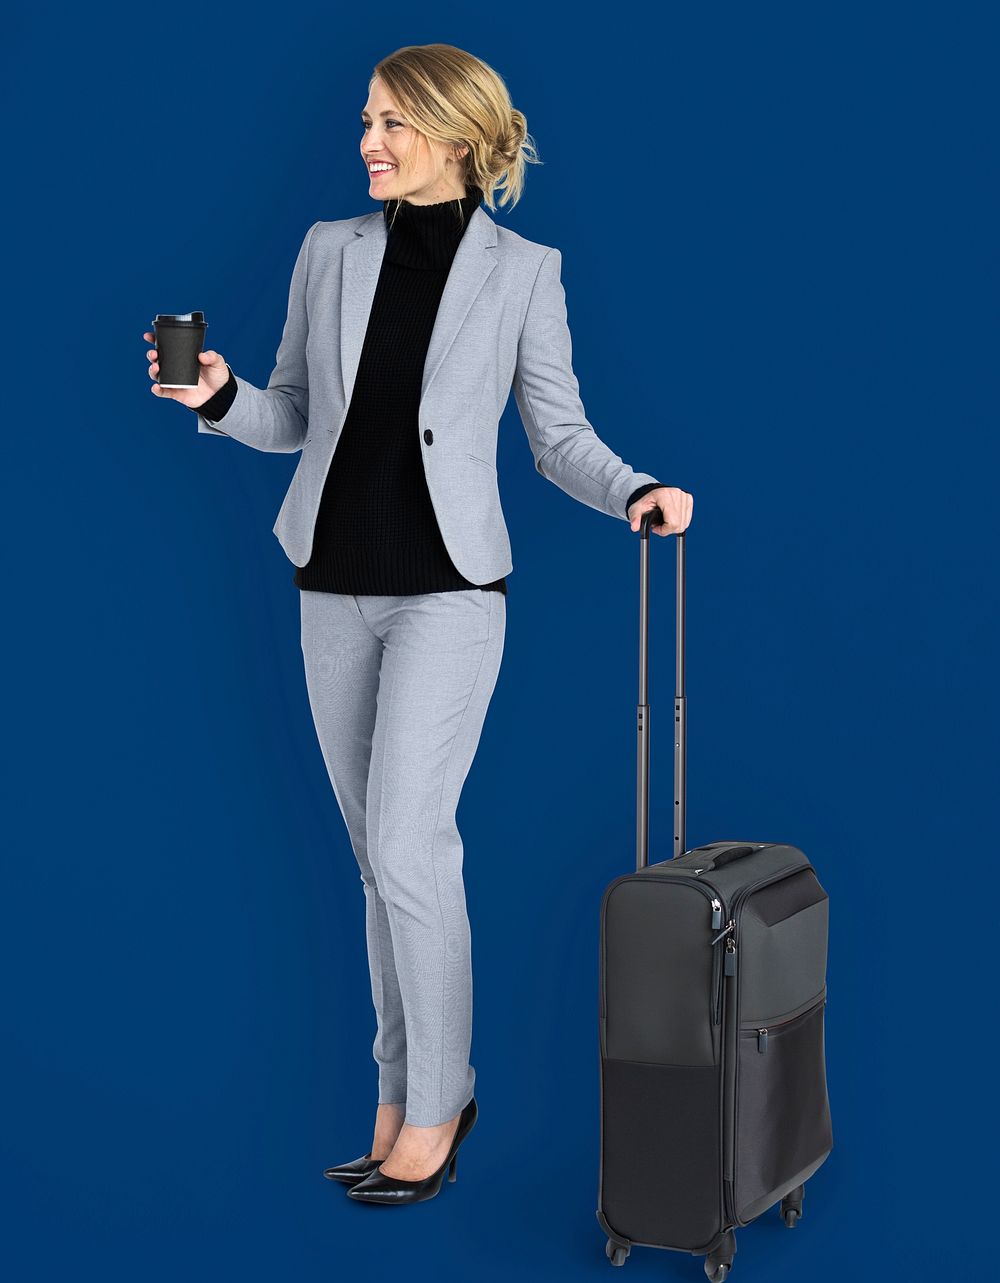 Caucasian Business Woman Travel Luggage Concept